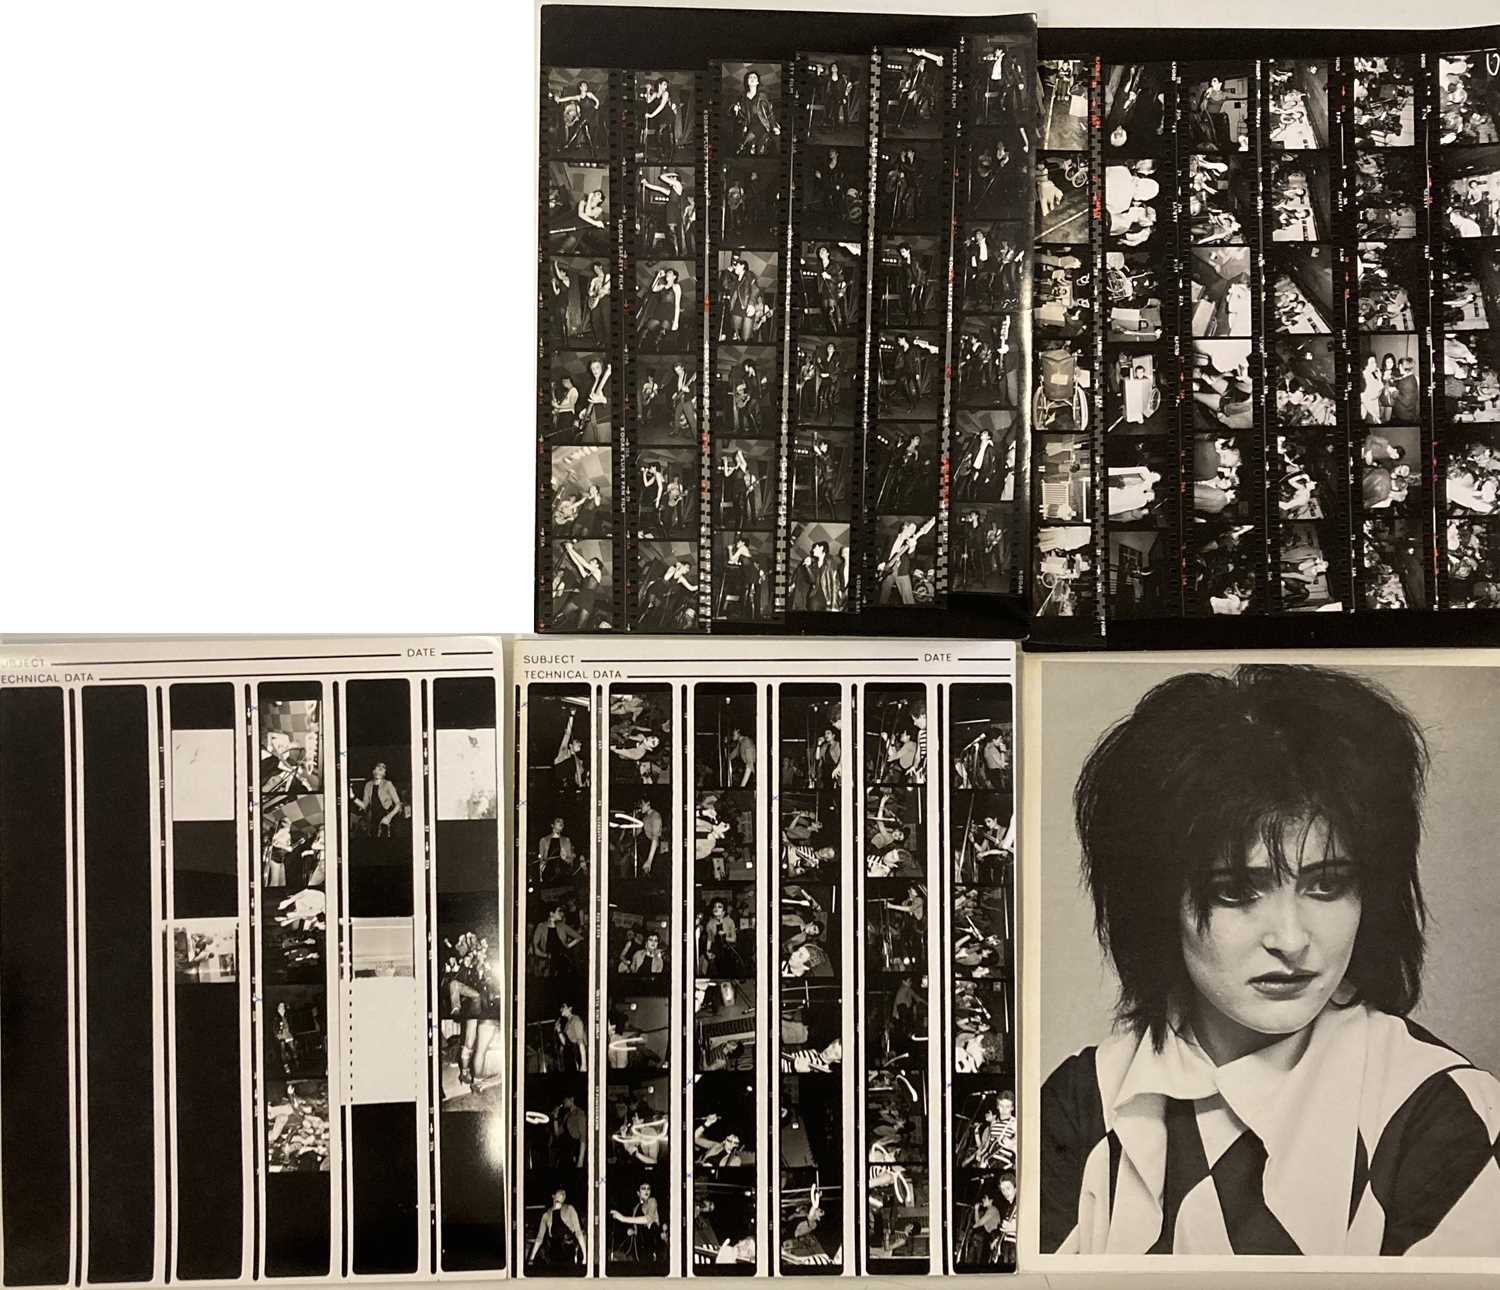 Lot 335 - PUNK AND NEW WAVE PHOTO ARCHIVE - SIOUXSIE AND THE BANSHEES